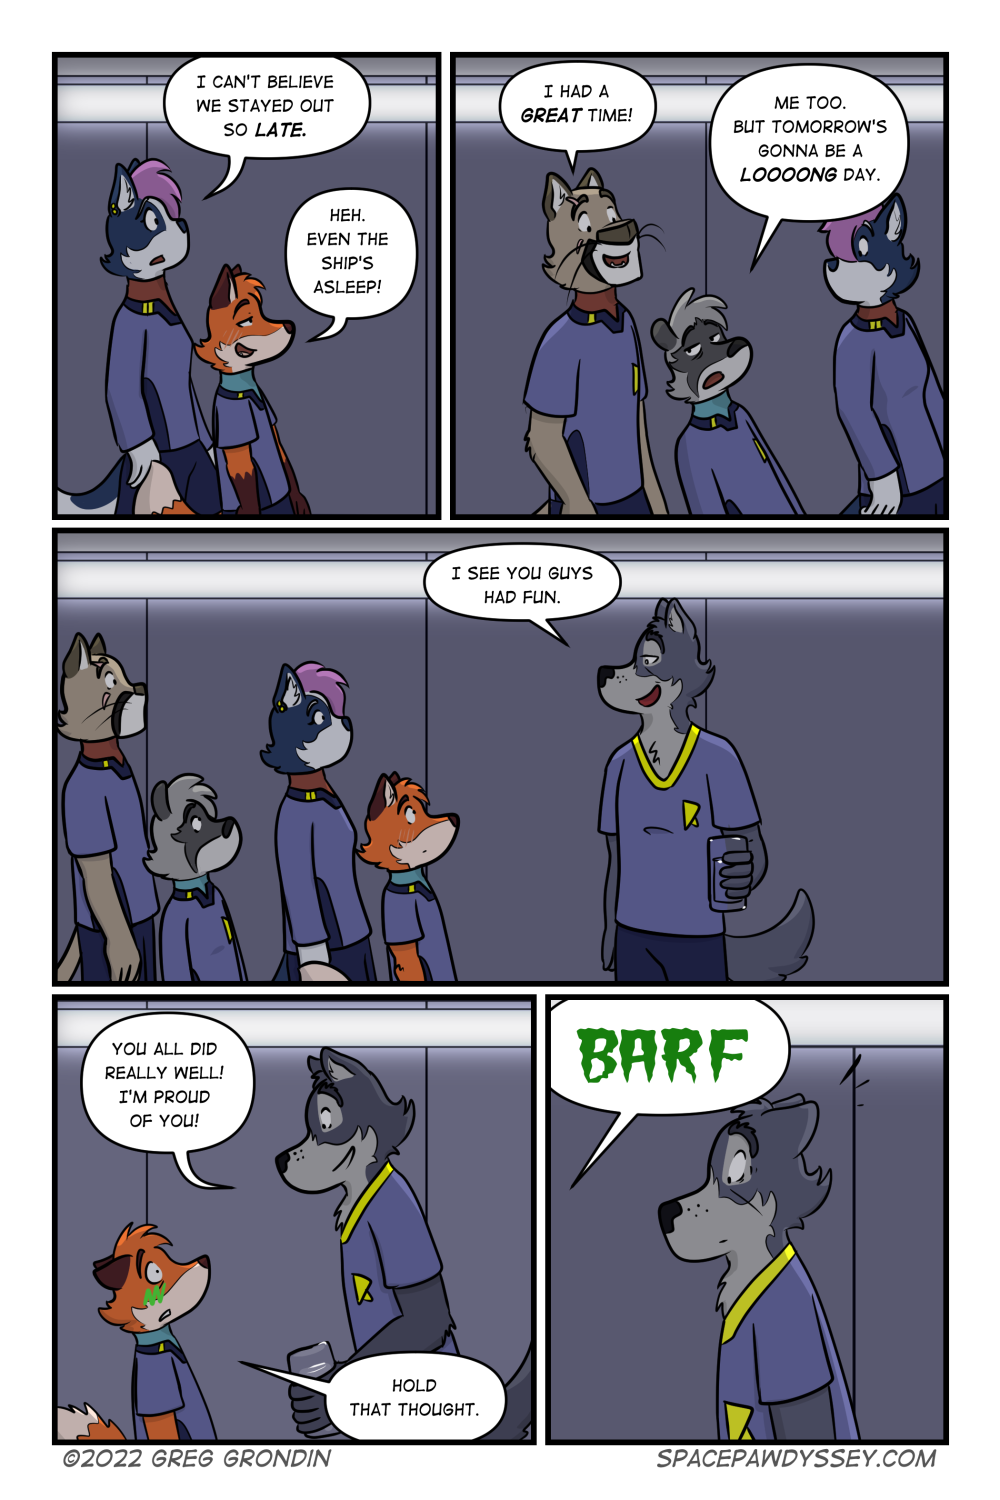 Space Pawdyssey #570